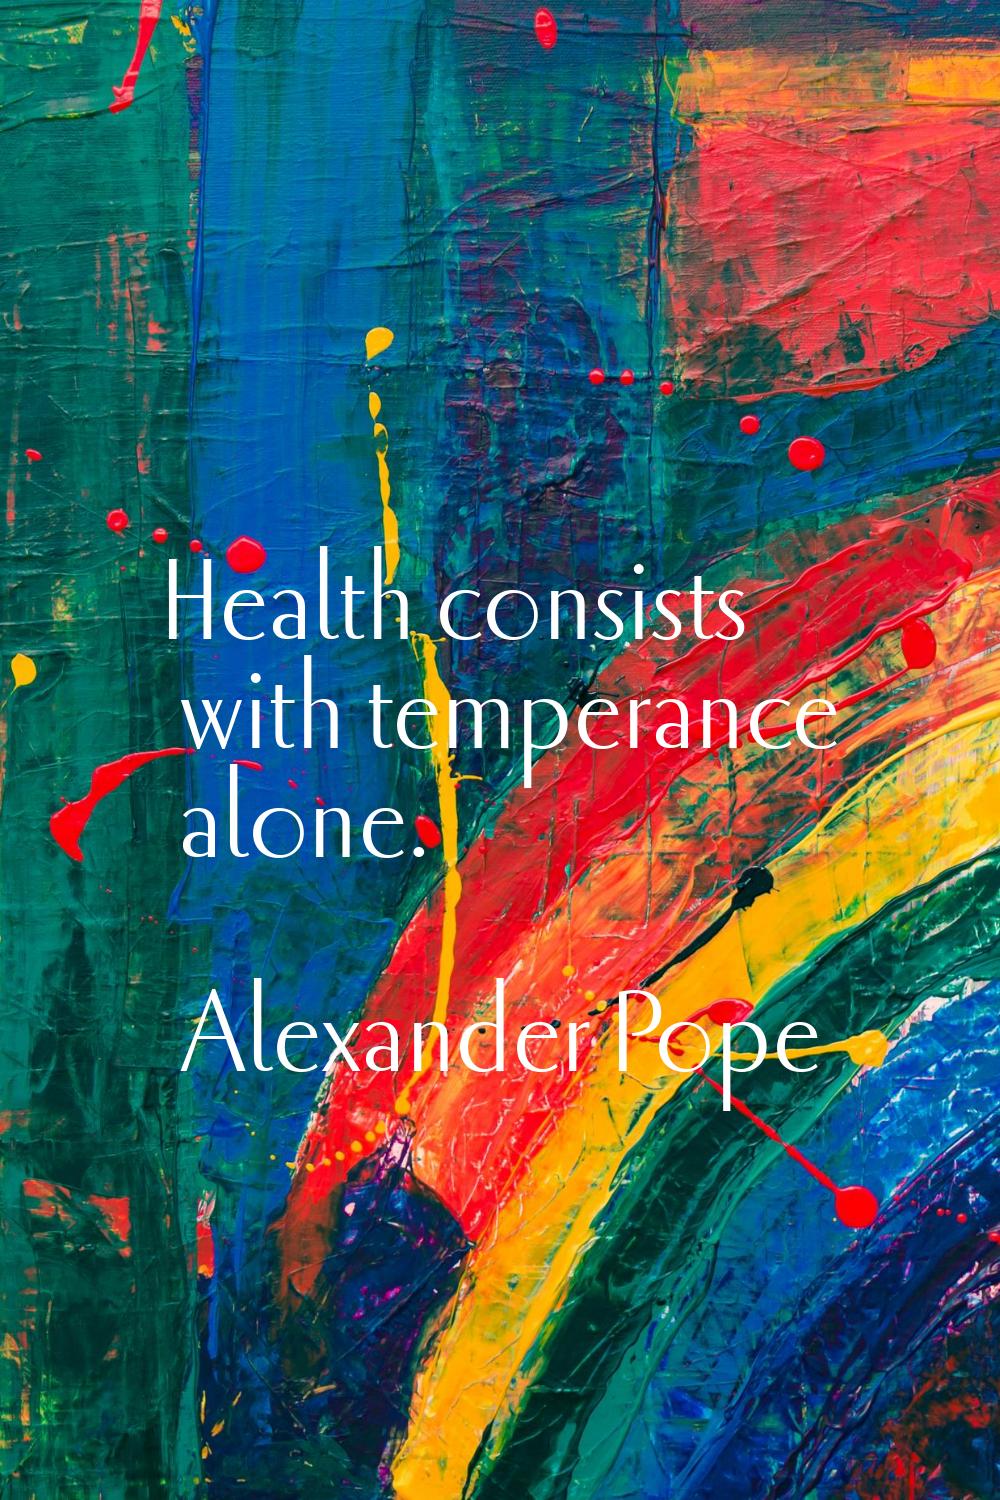 Health consists with temperance alone.